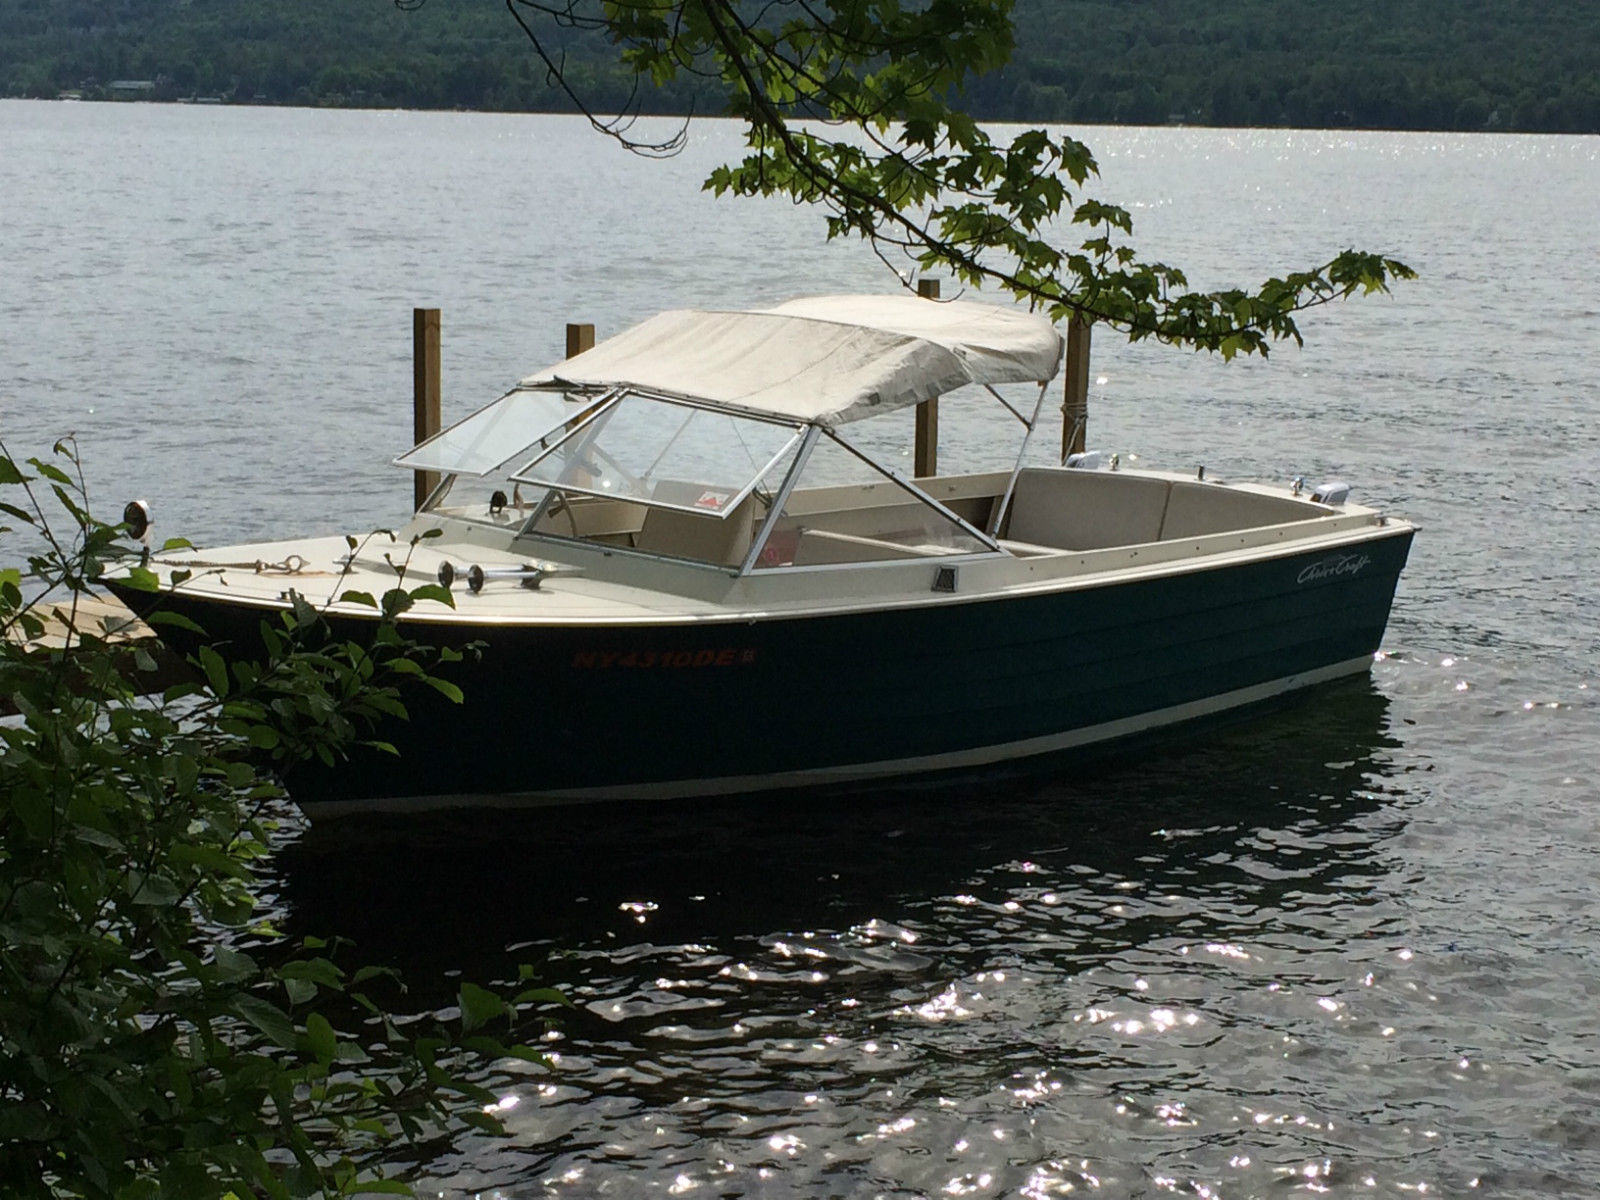 Chris Craft Sea Skiff 1966 for sale for $5,500 - Boats 